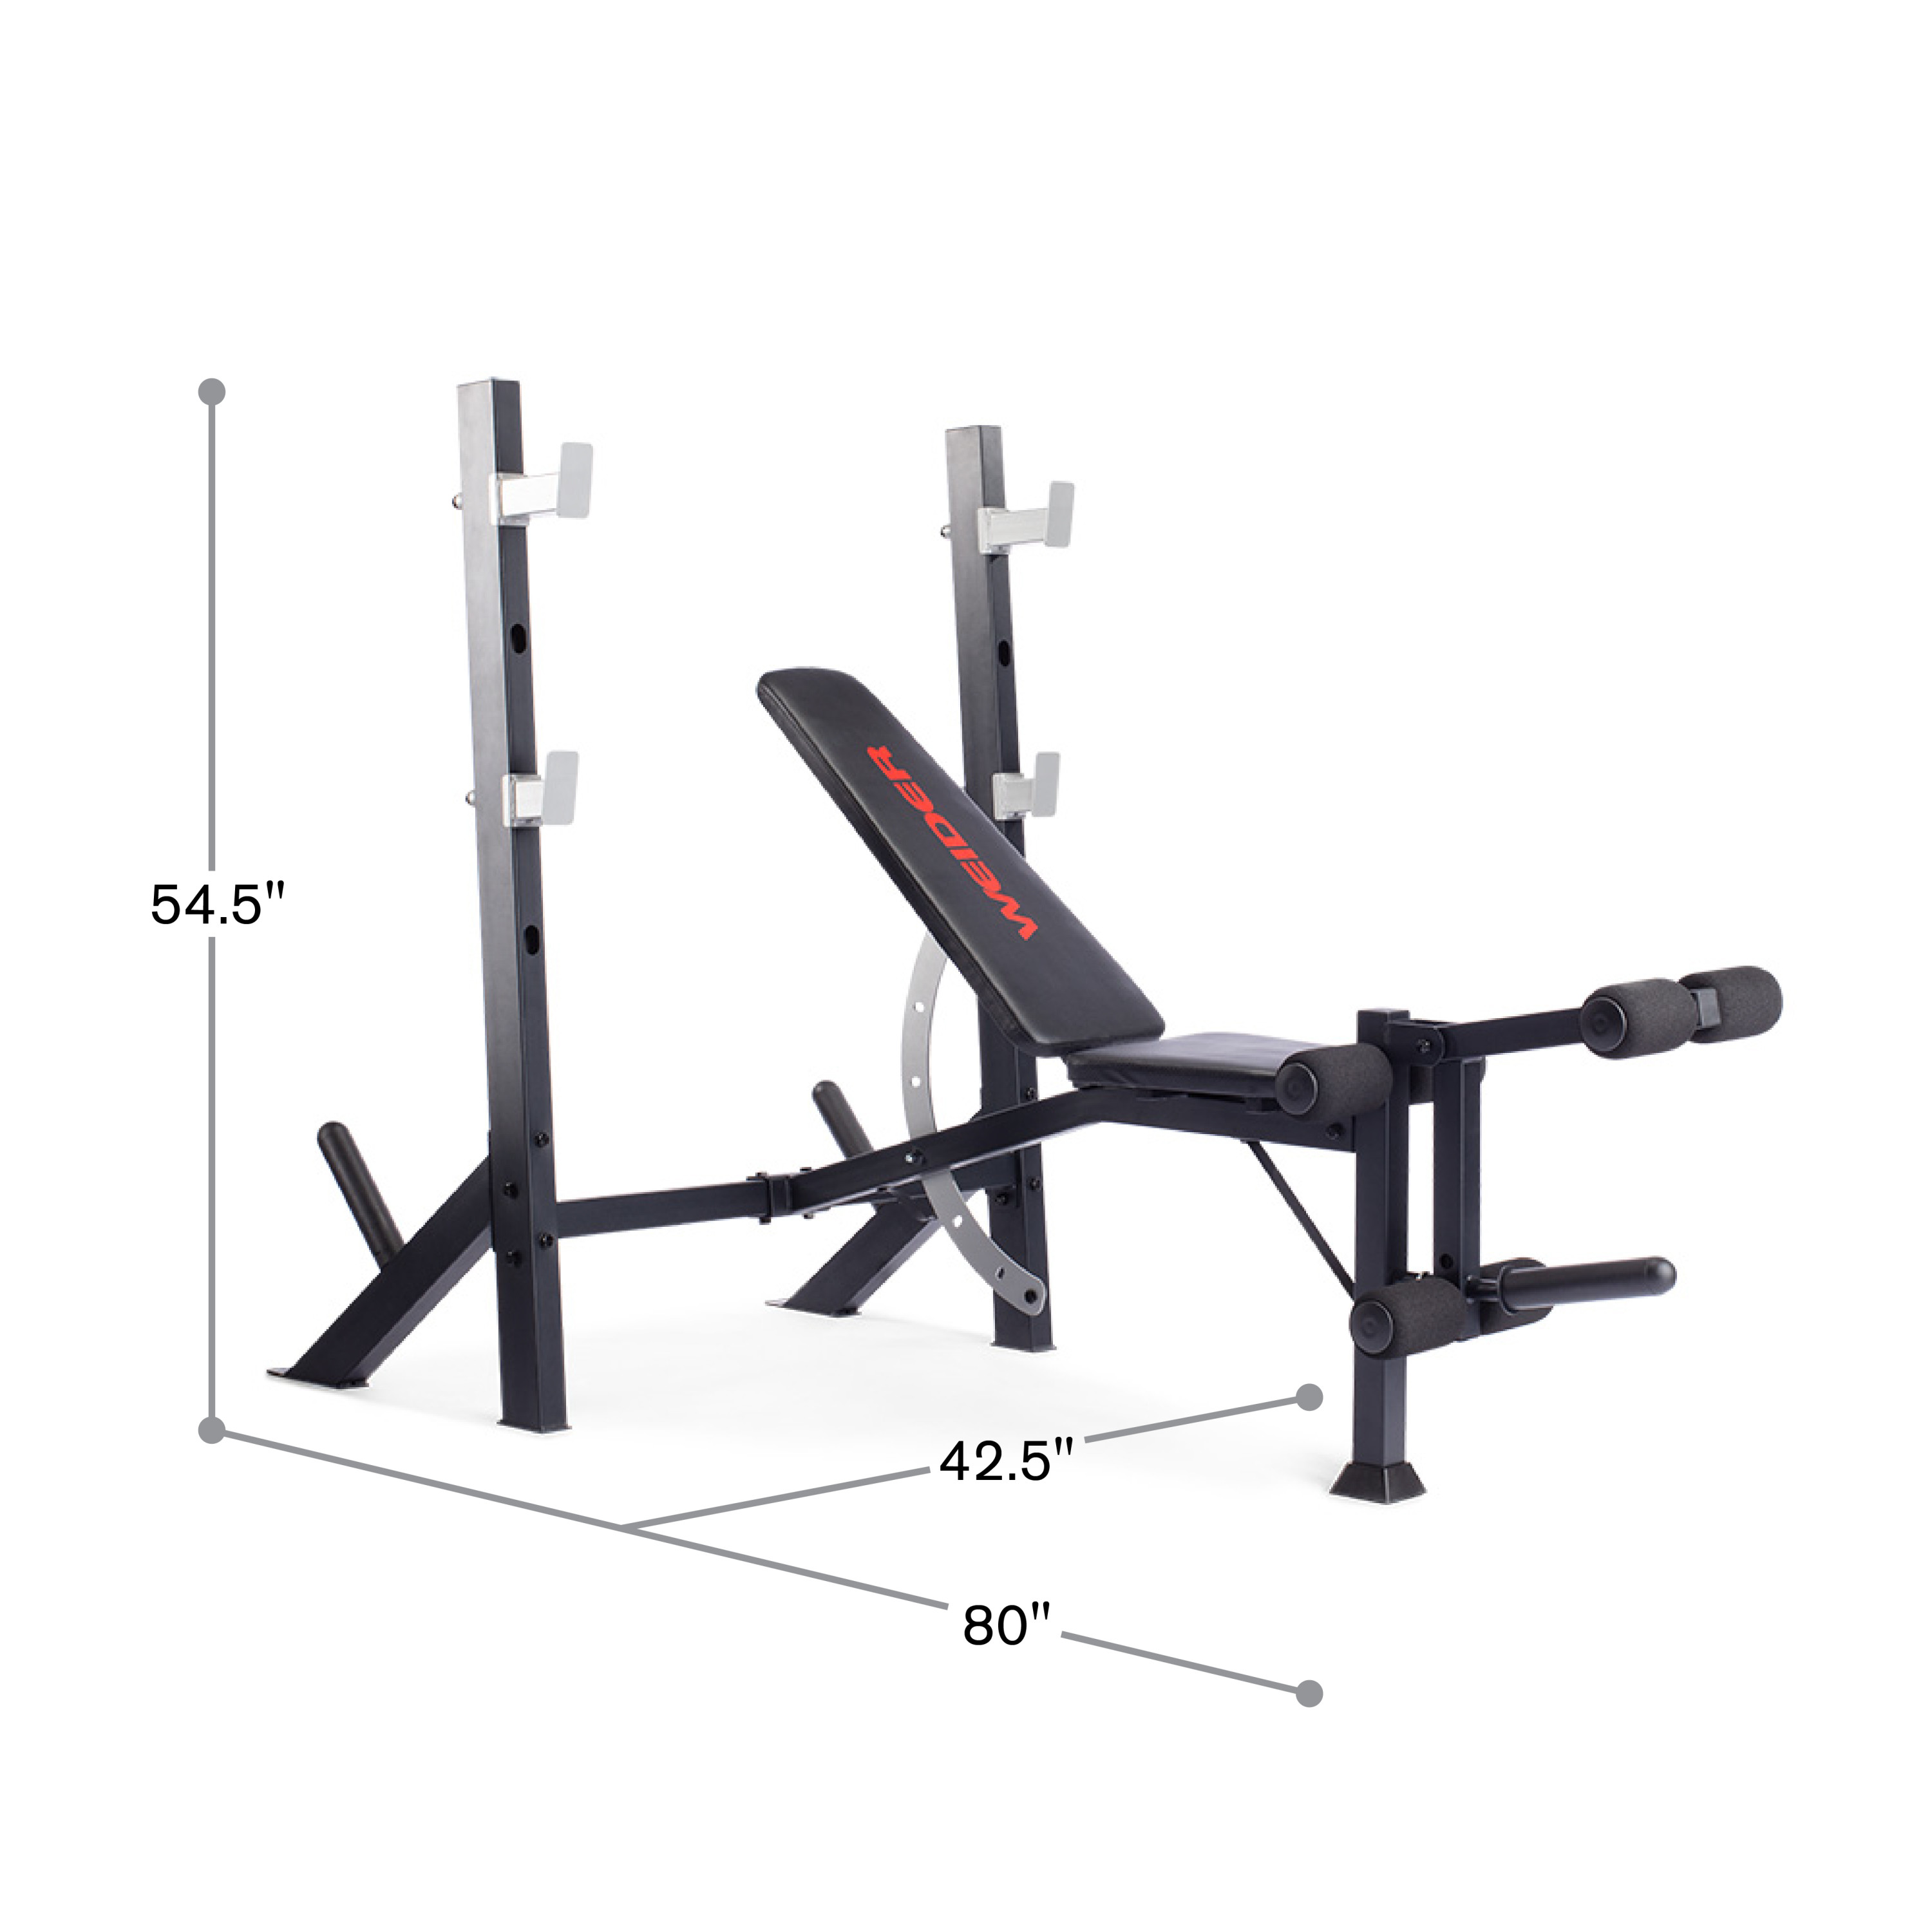 Buy Weider Legacy Adjustable Olympic Bench And Rack With Leg Developer